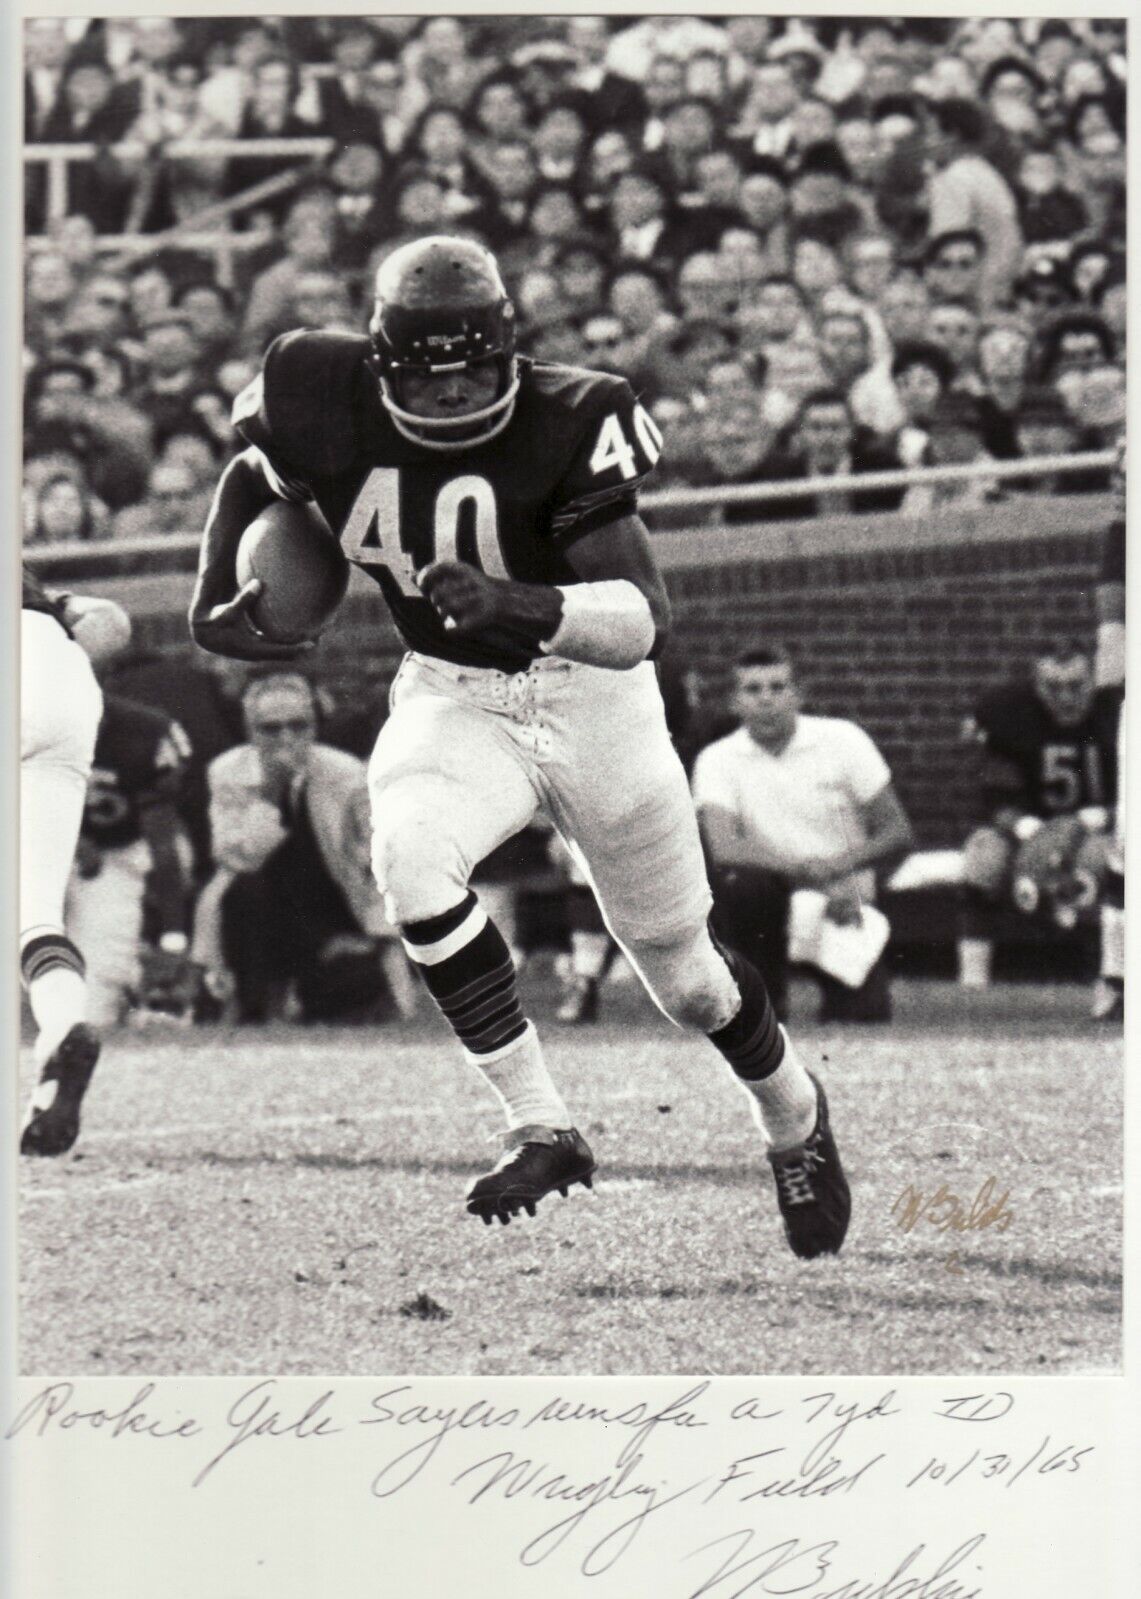 65\' Gale Sayers Chicago Bears #40 William Bielskis signed photo w/ embossed seal